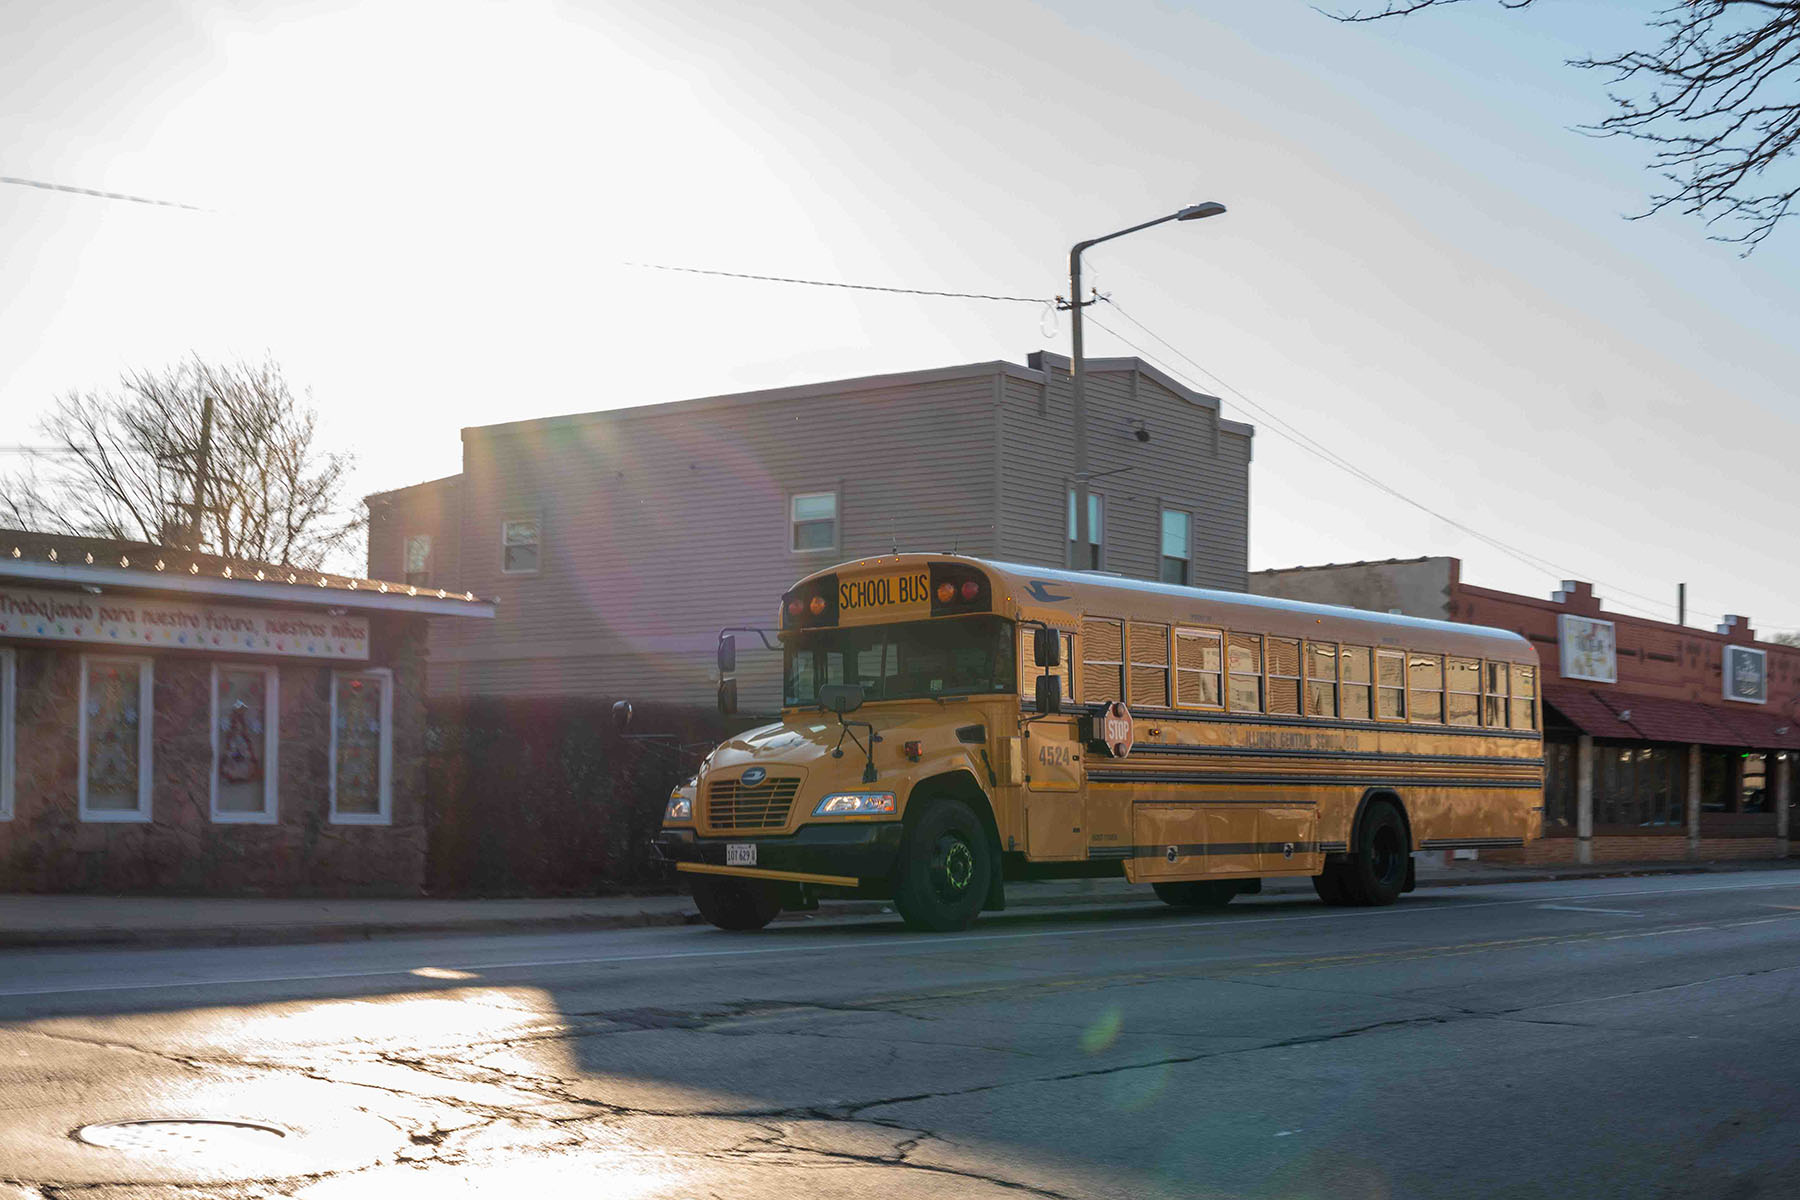 An illinois Central disctrict school bus is seen on a quiet street in Waukegan, Illinois.